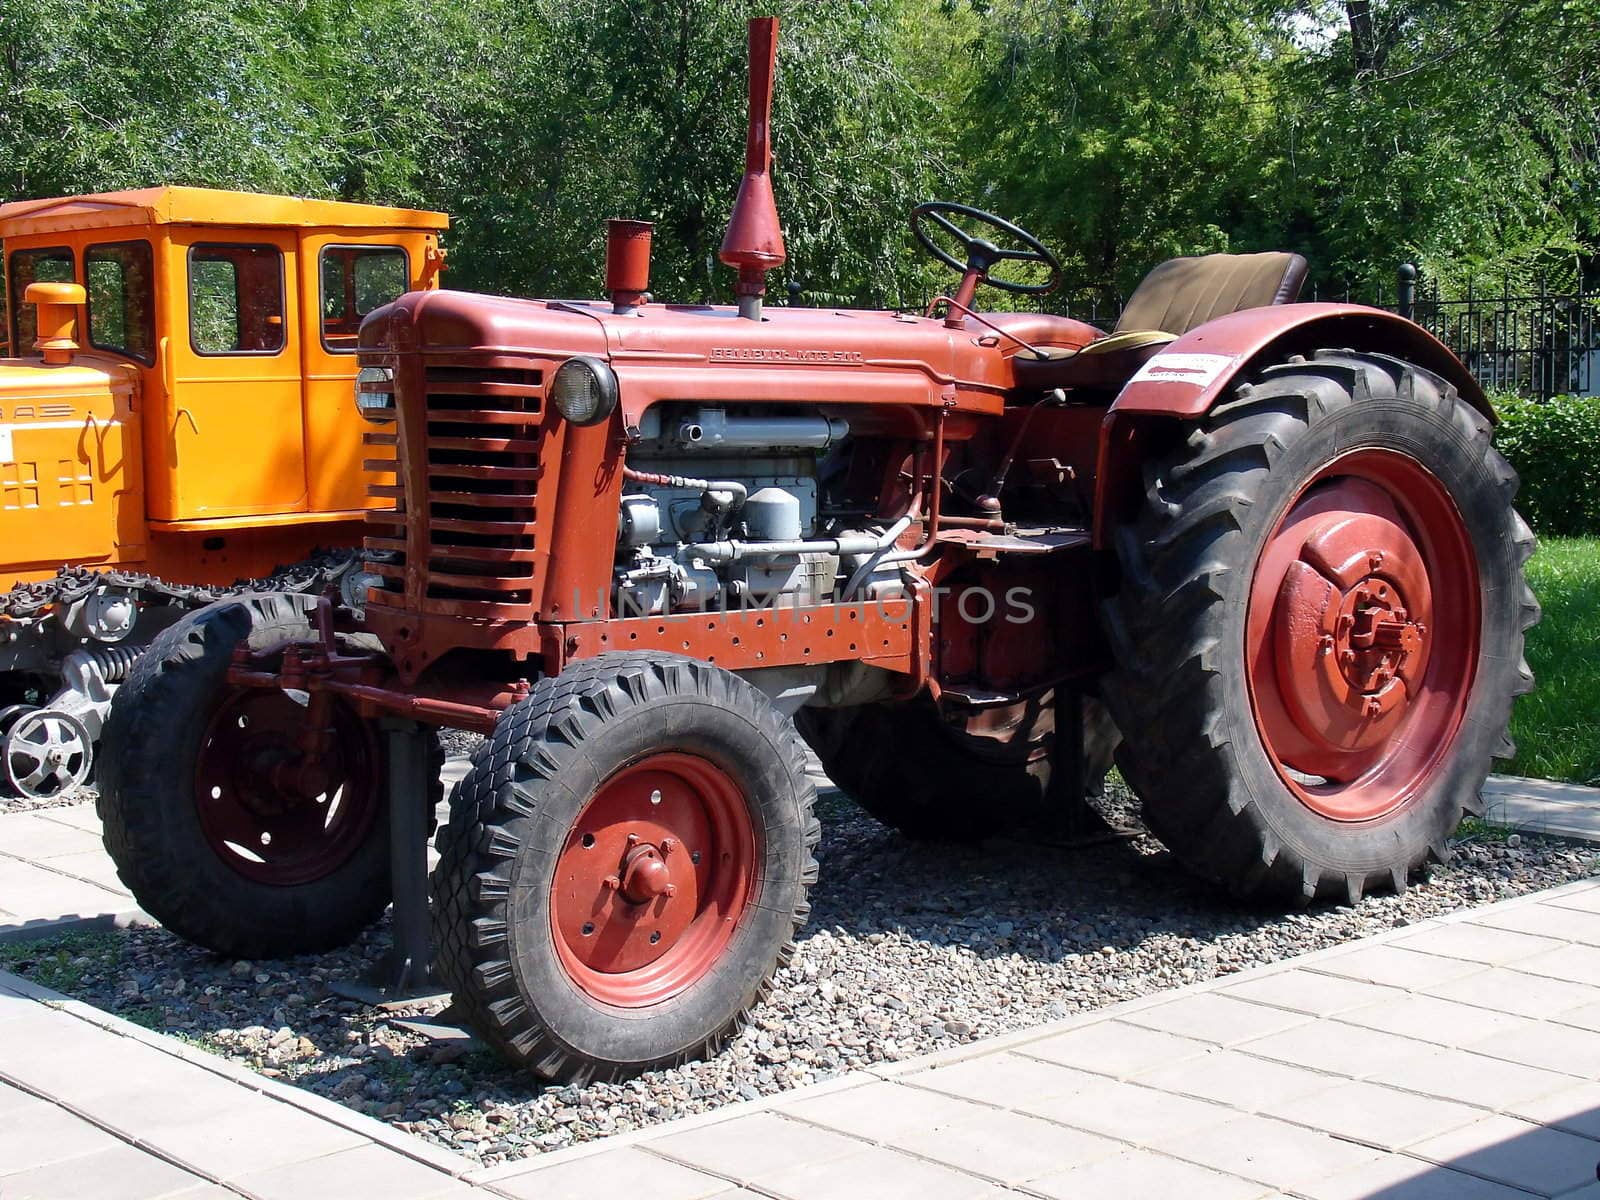 Red tractor at the outdoor technique museum